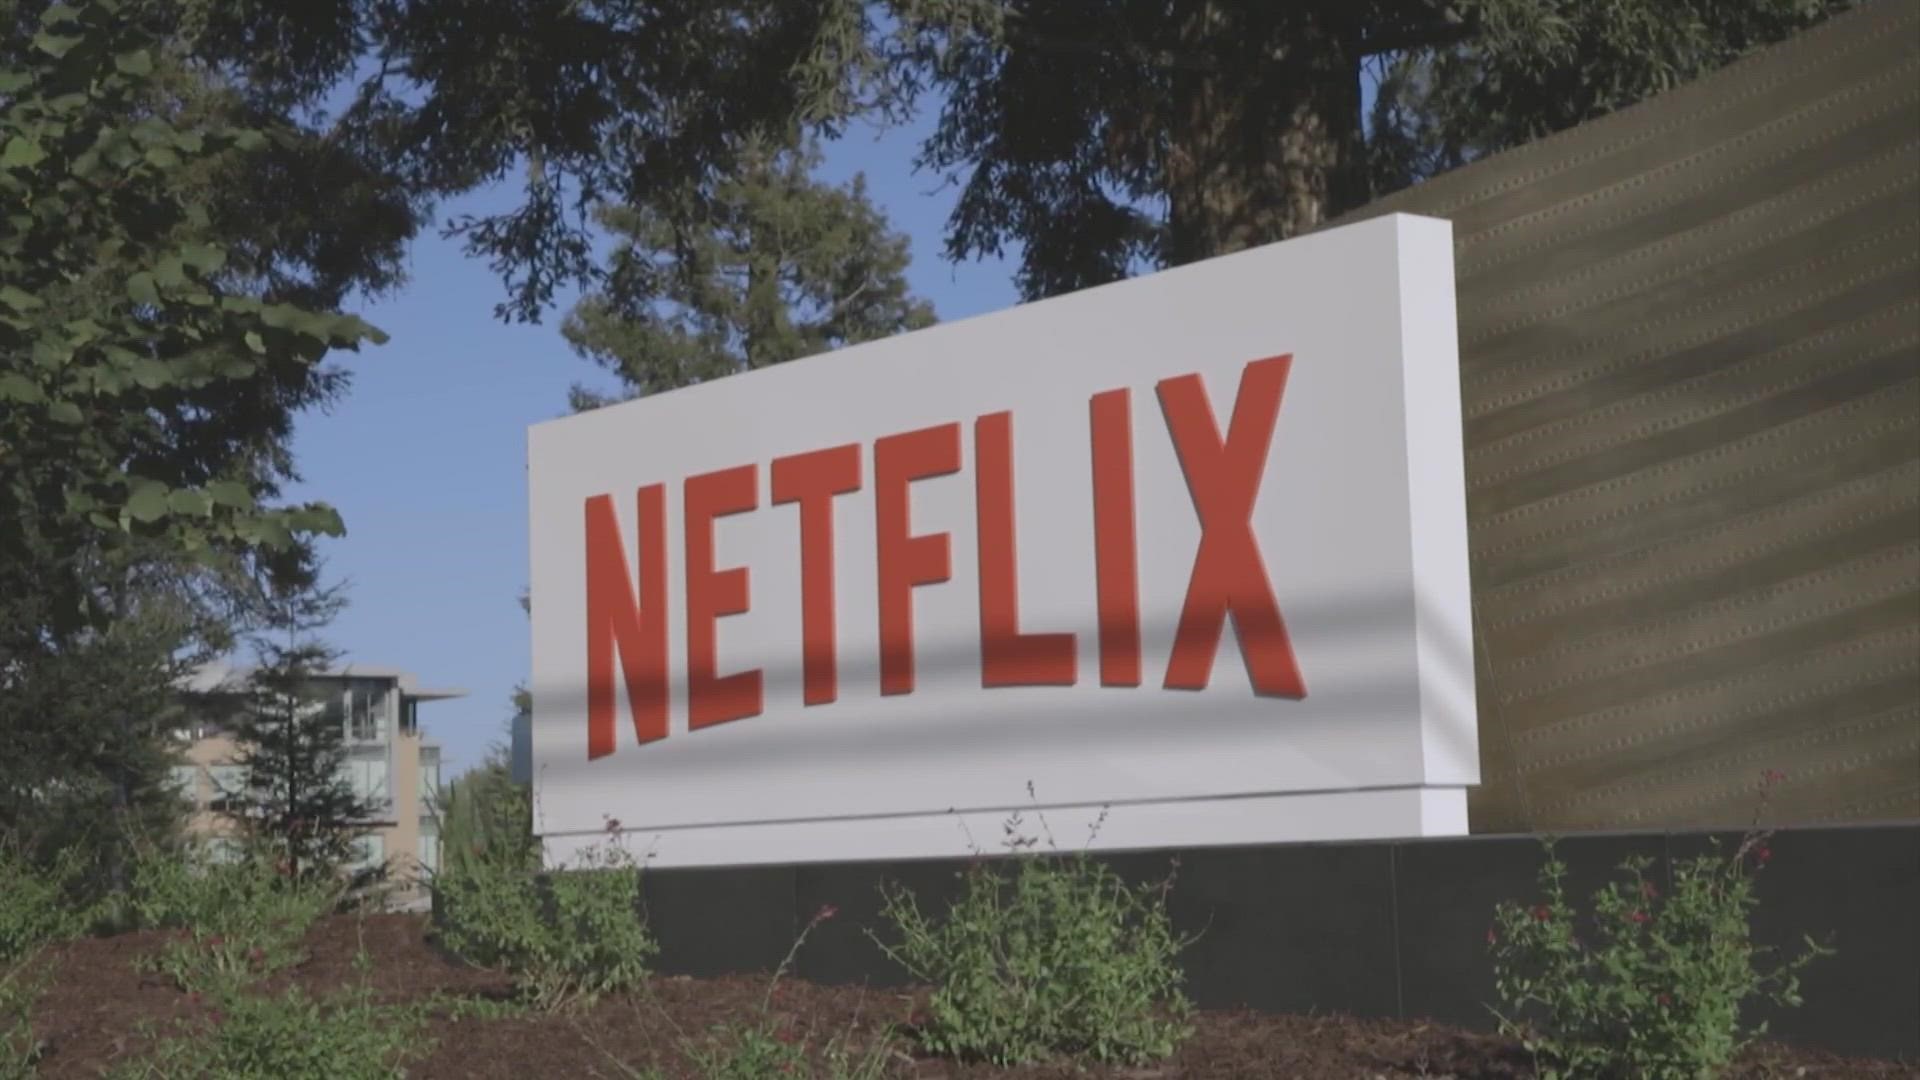 Netflix said it will offer a paid sharing plan.